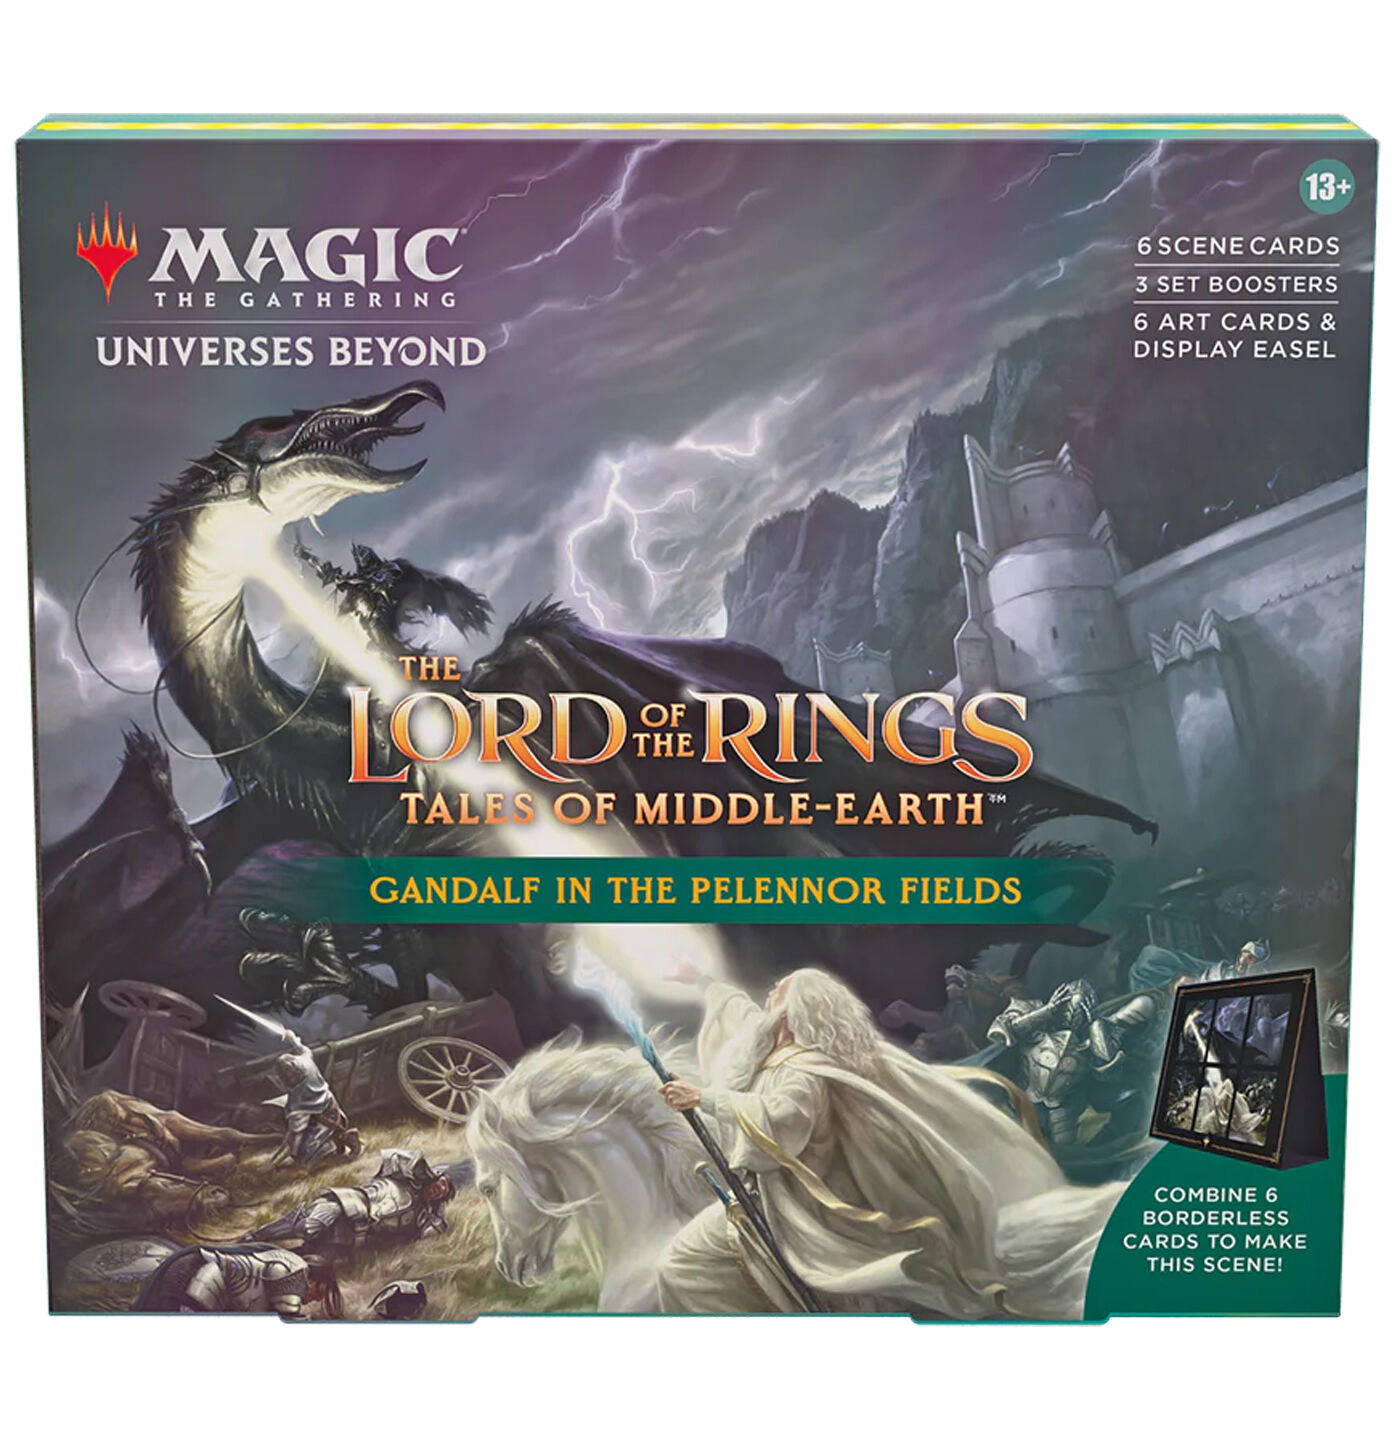 The Lord of the Rings: Tales of Middle-earth Scene Box Gandalf in The Pelennor Fields - Magic the Gathering - EN